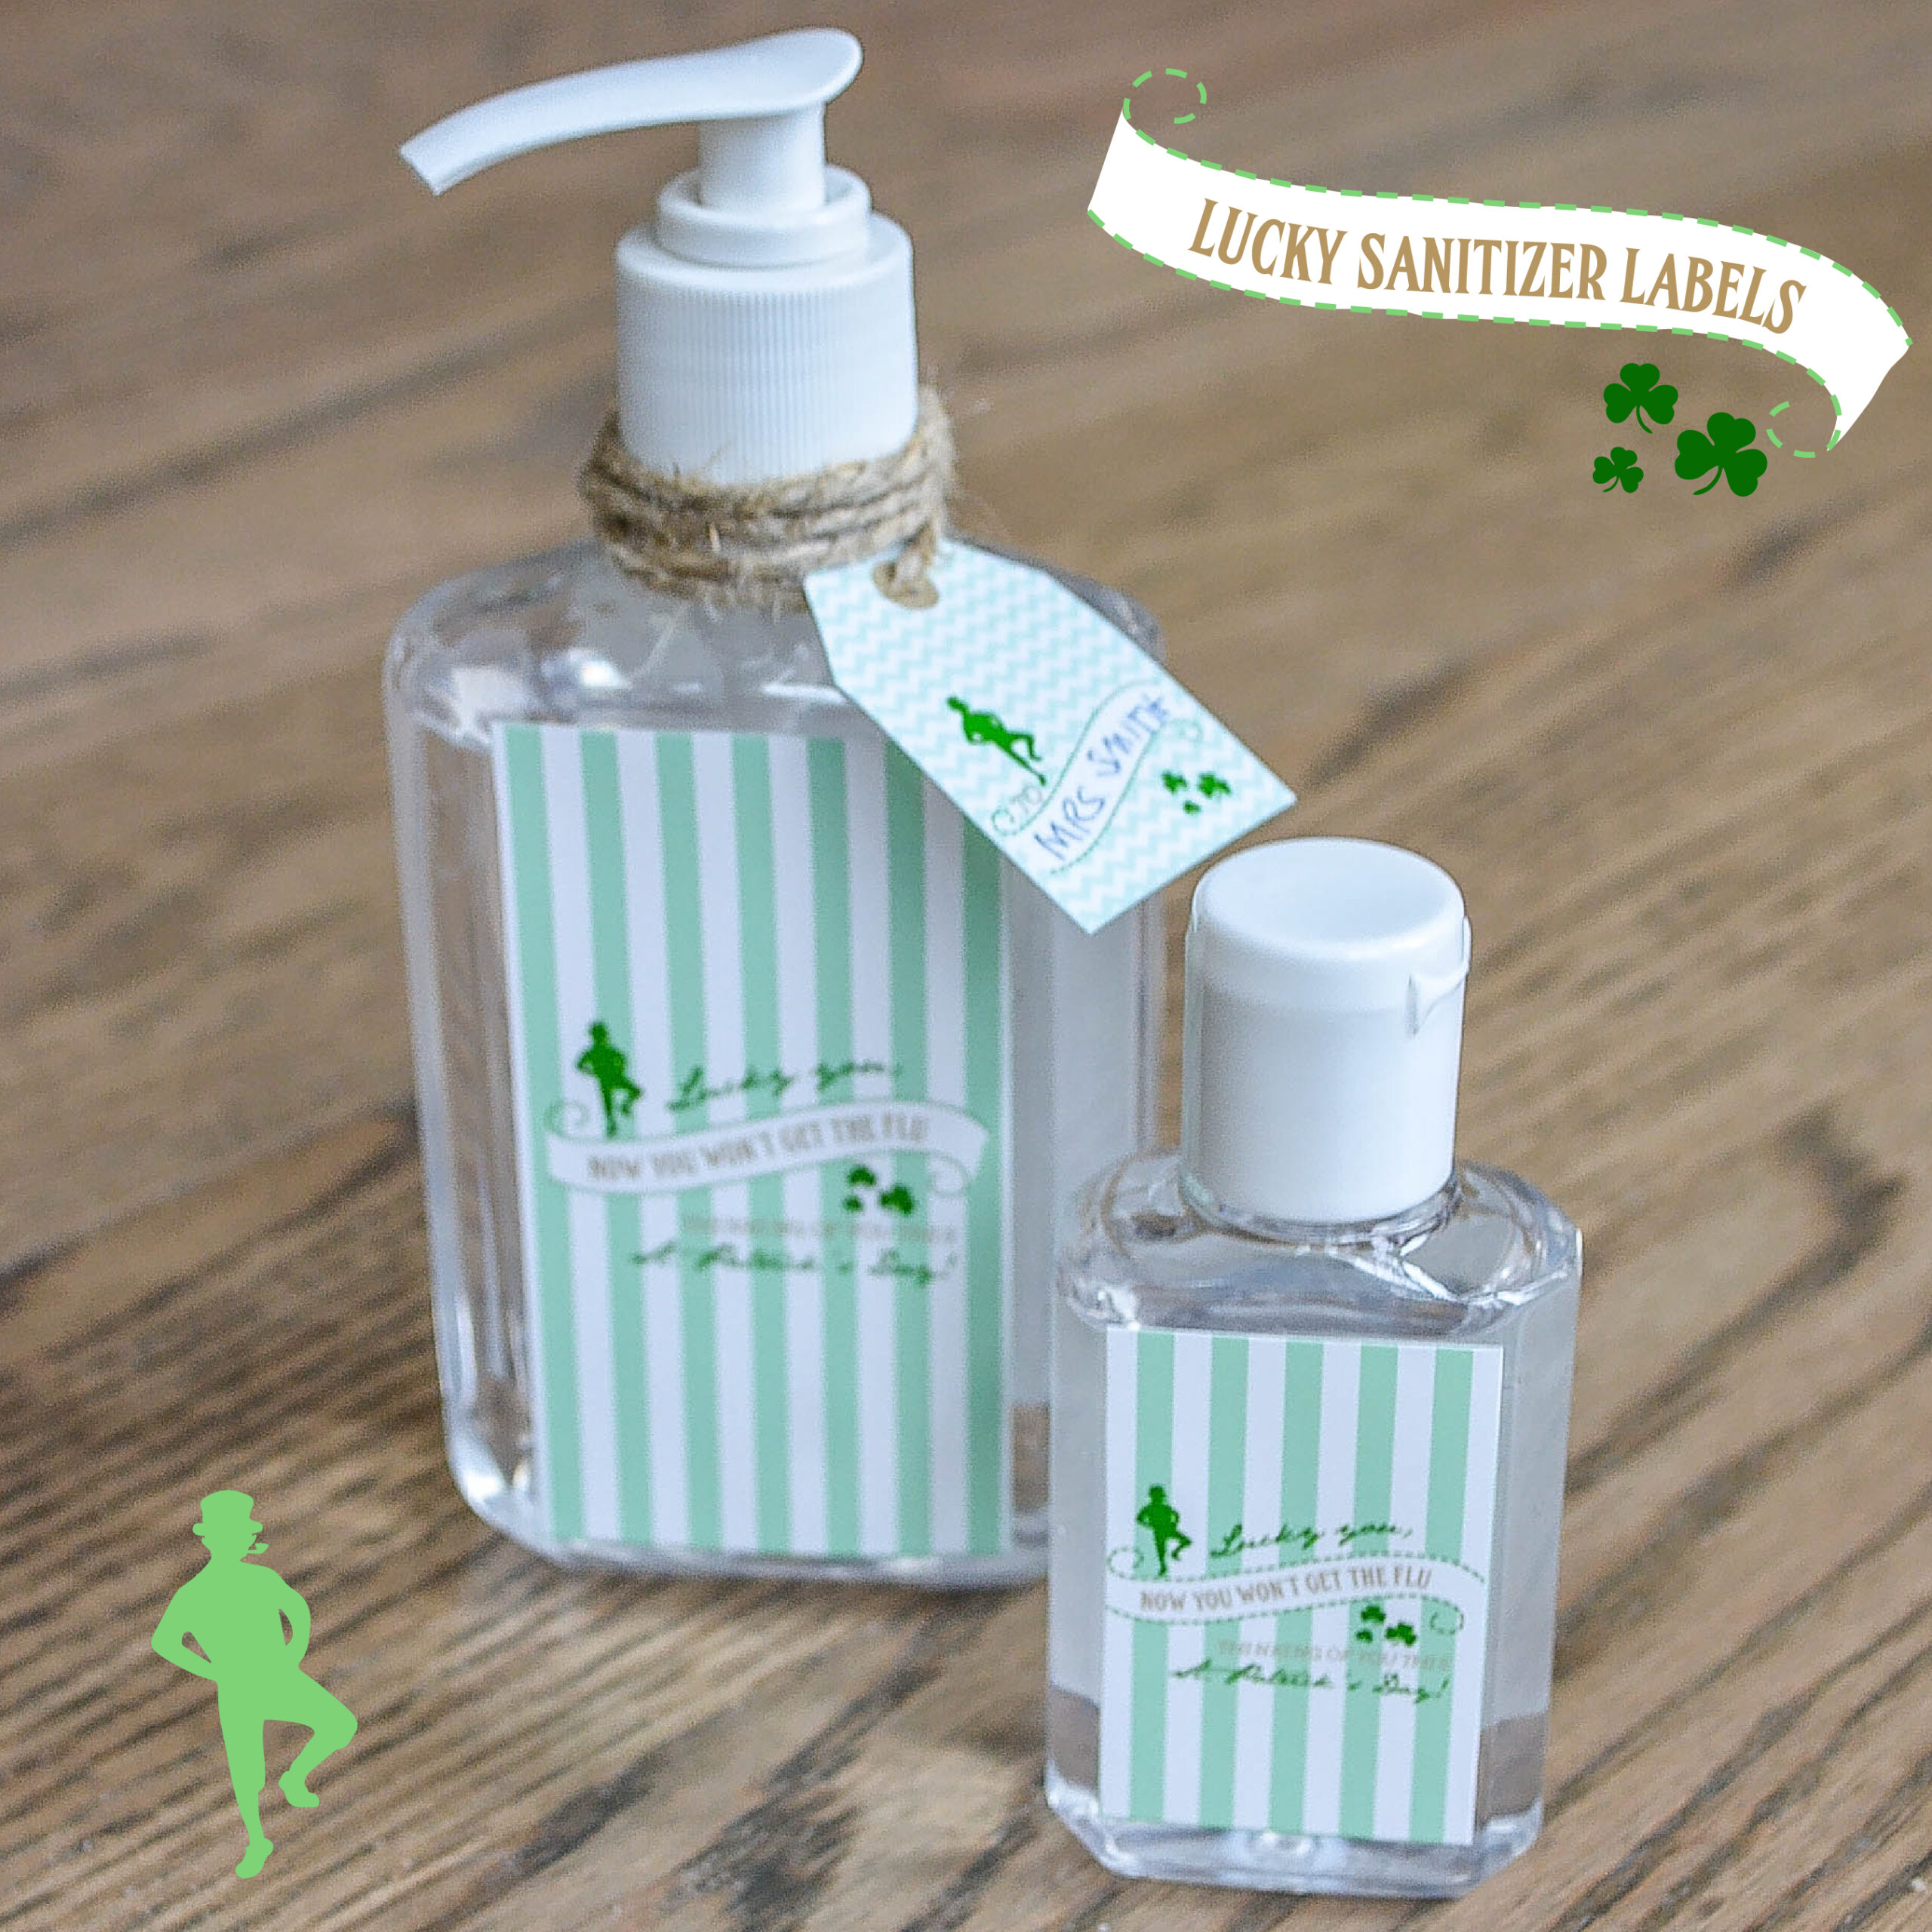 Ruff Draft: Making Lucky You Hand Sanitizer Printable Labels Intended For Hand Sanitizer Label Template